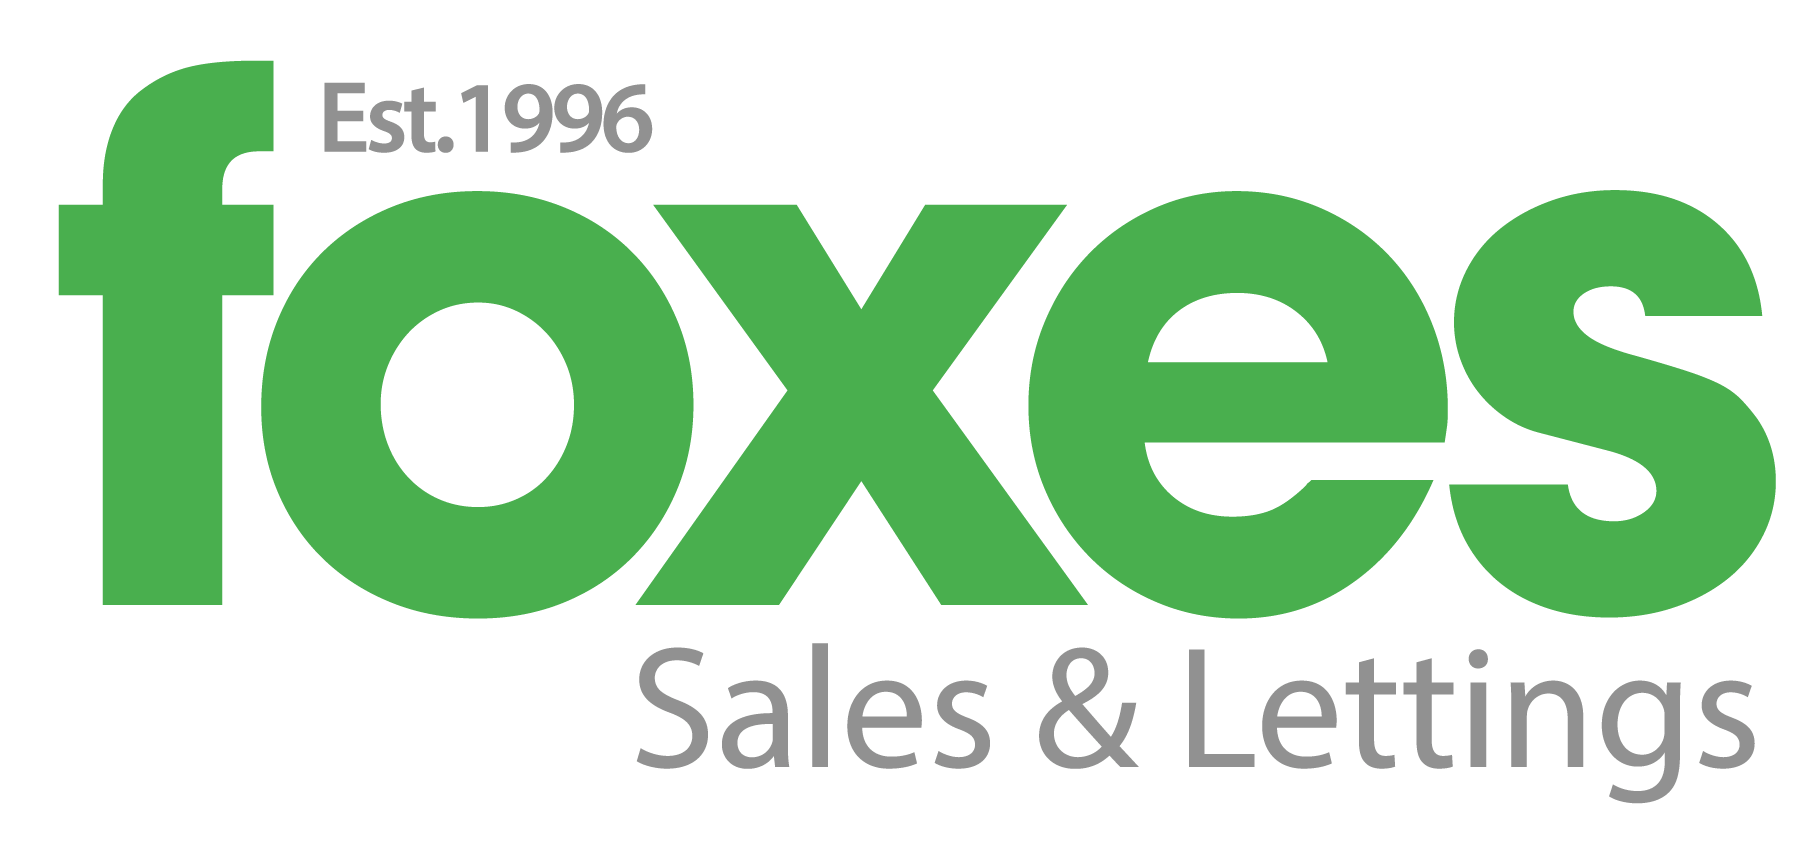 Foxes Sales & Lettings